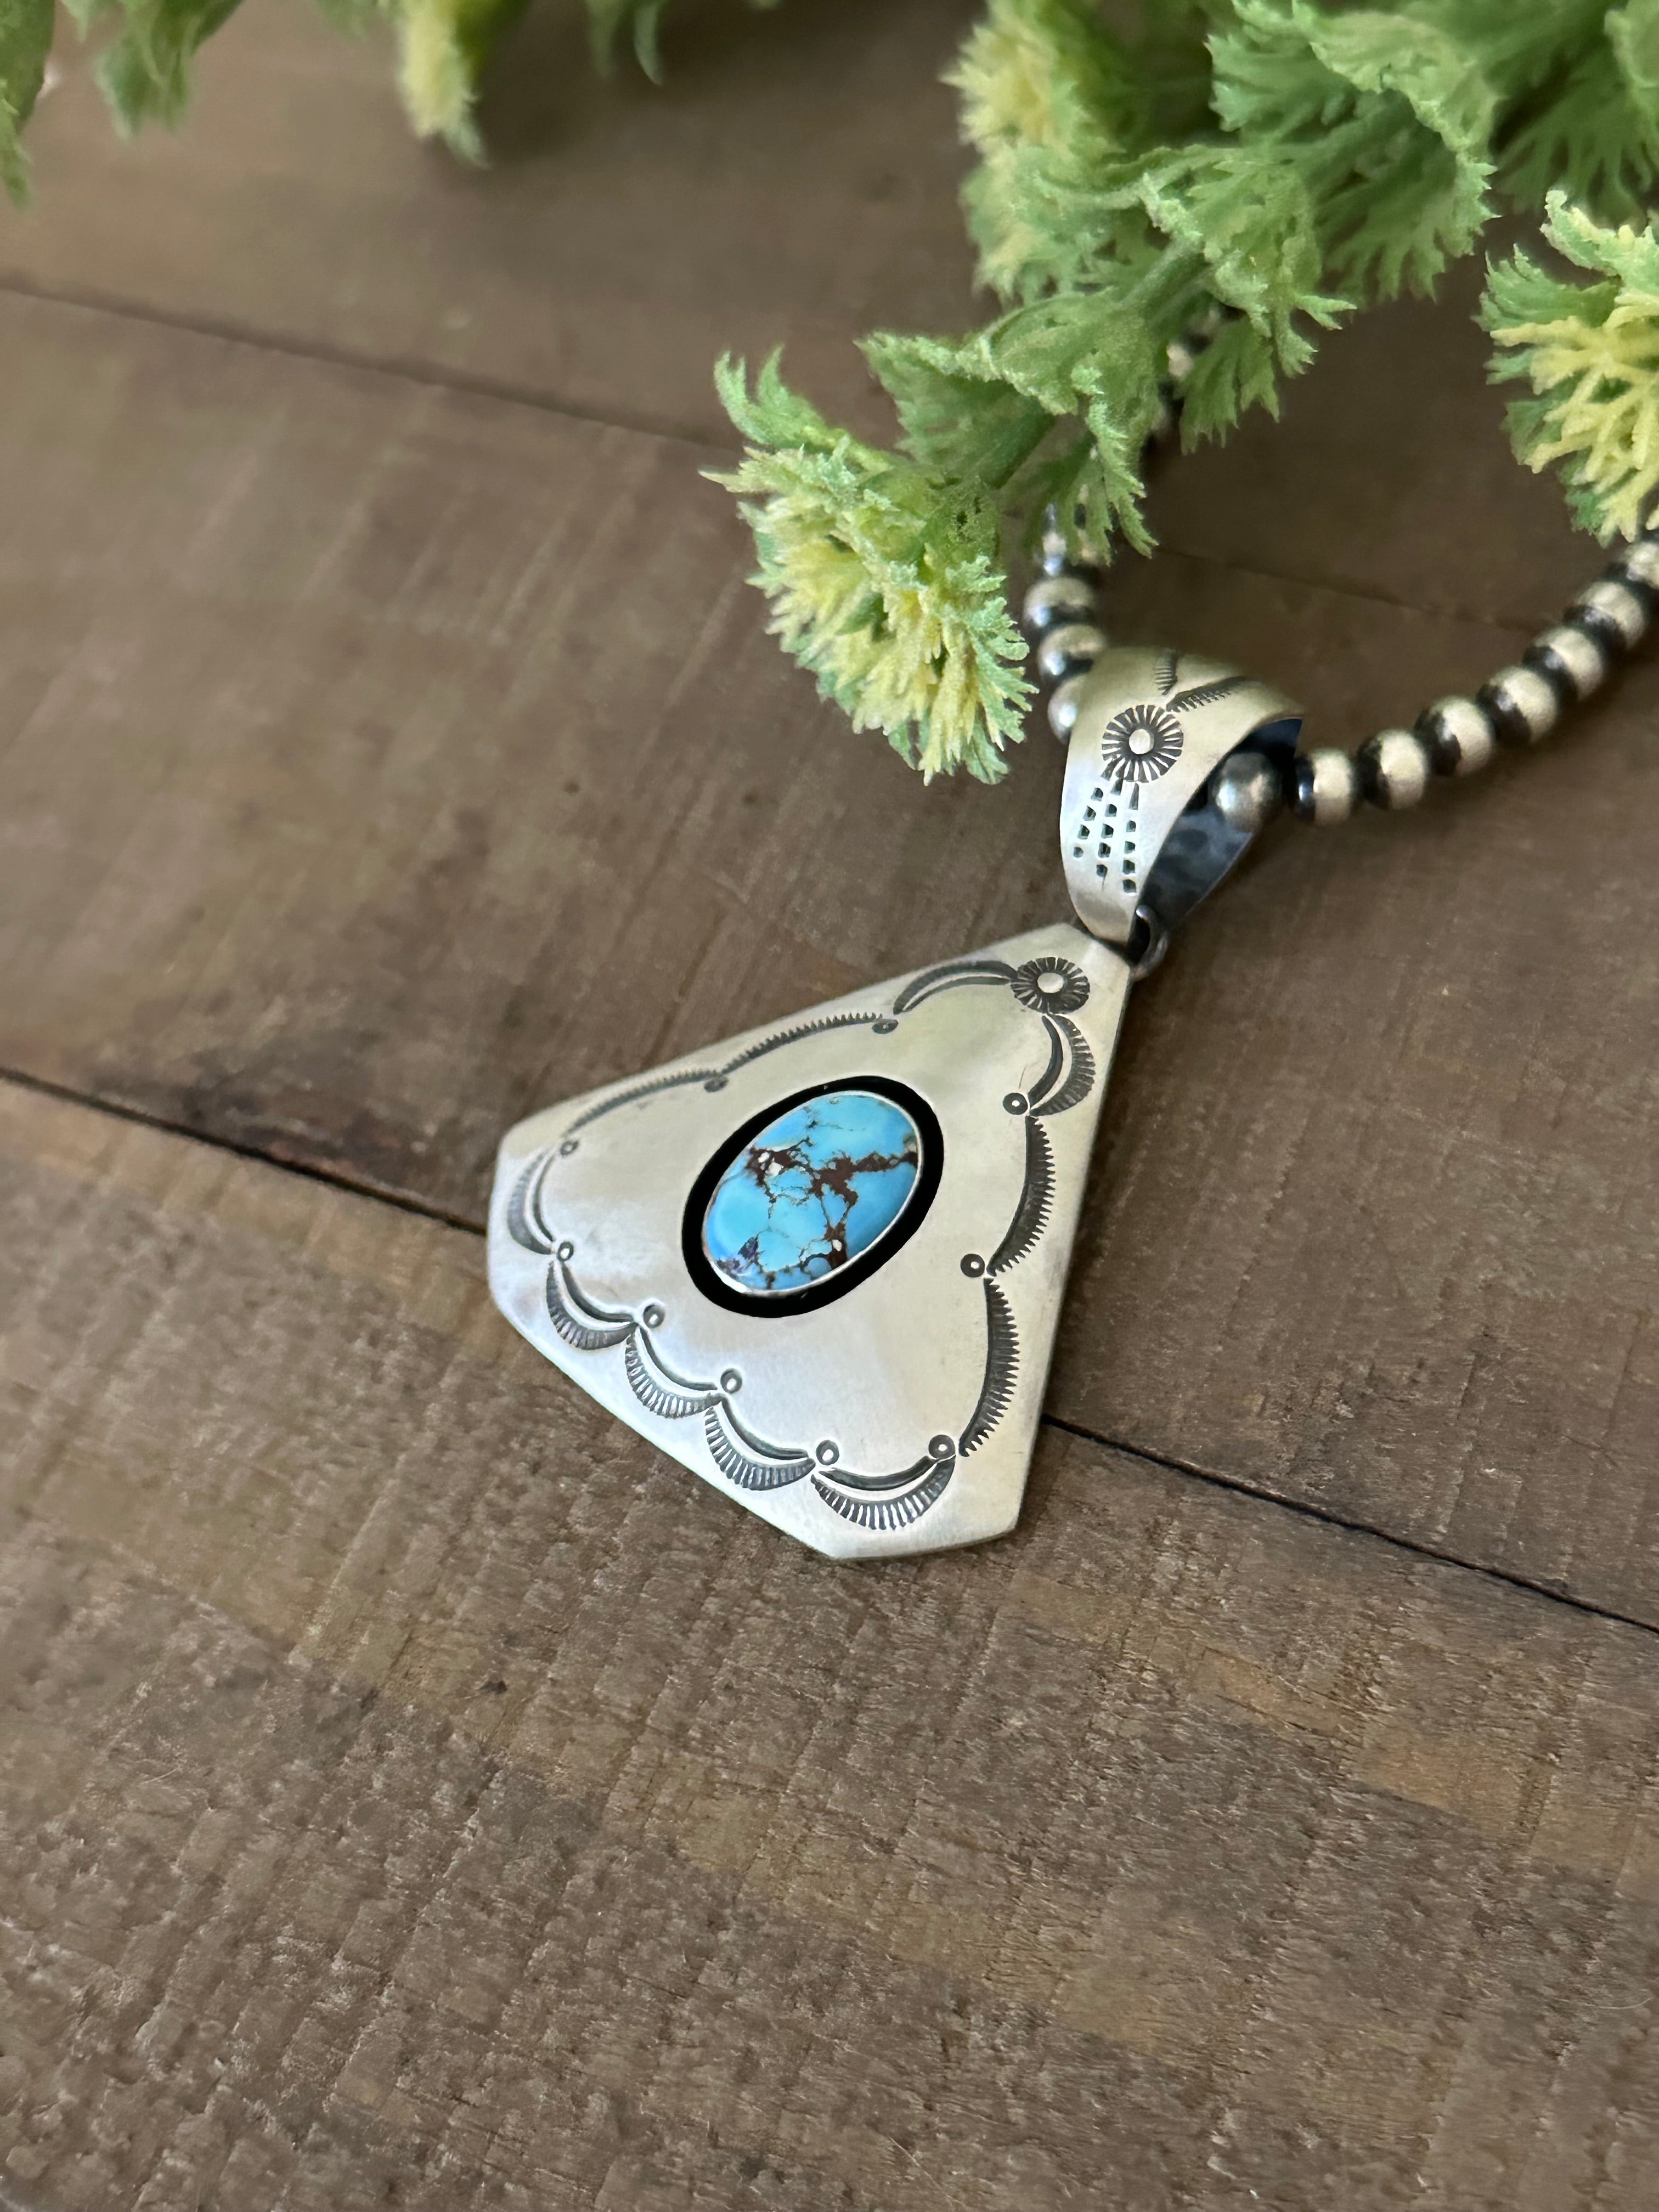 P Begay Golden Hills Turquoise & Sterling Silver Pendant